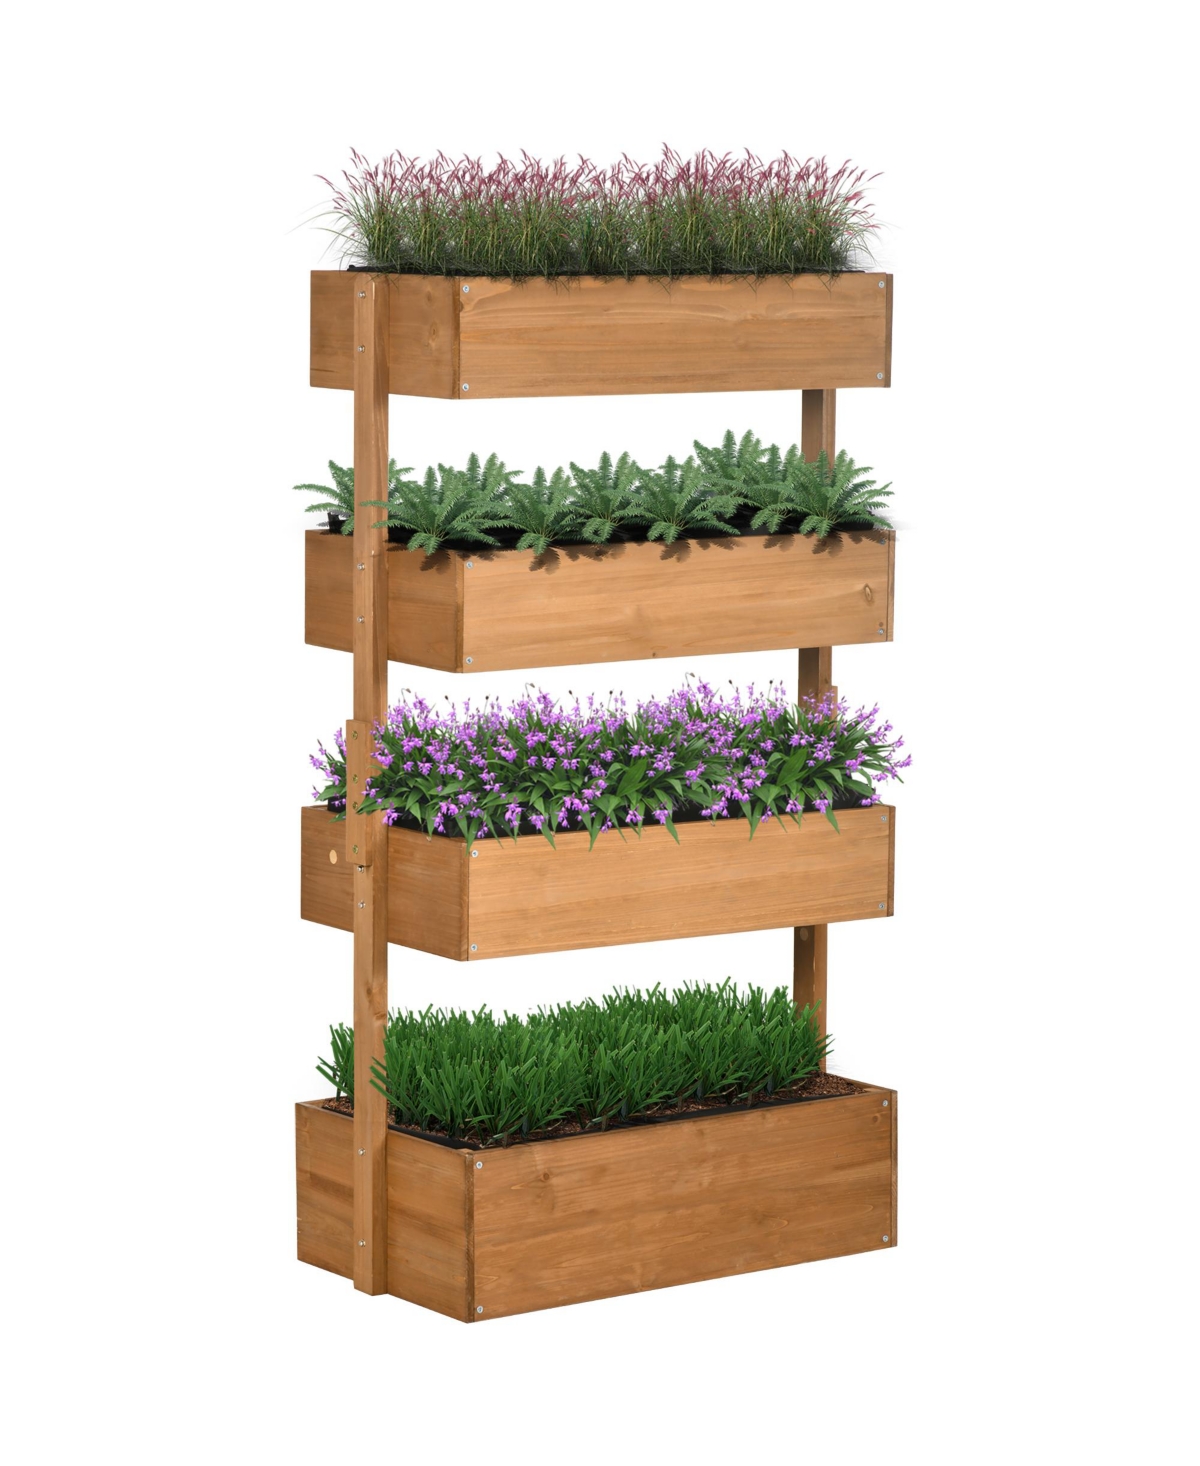 Vertical Garden Planter, Wooden 4 Tier Planter Box, Self-Draining with Non-Woven Fabric for Outdoor Flowers, Vegetables & Herbs - Natural